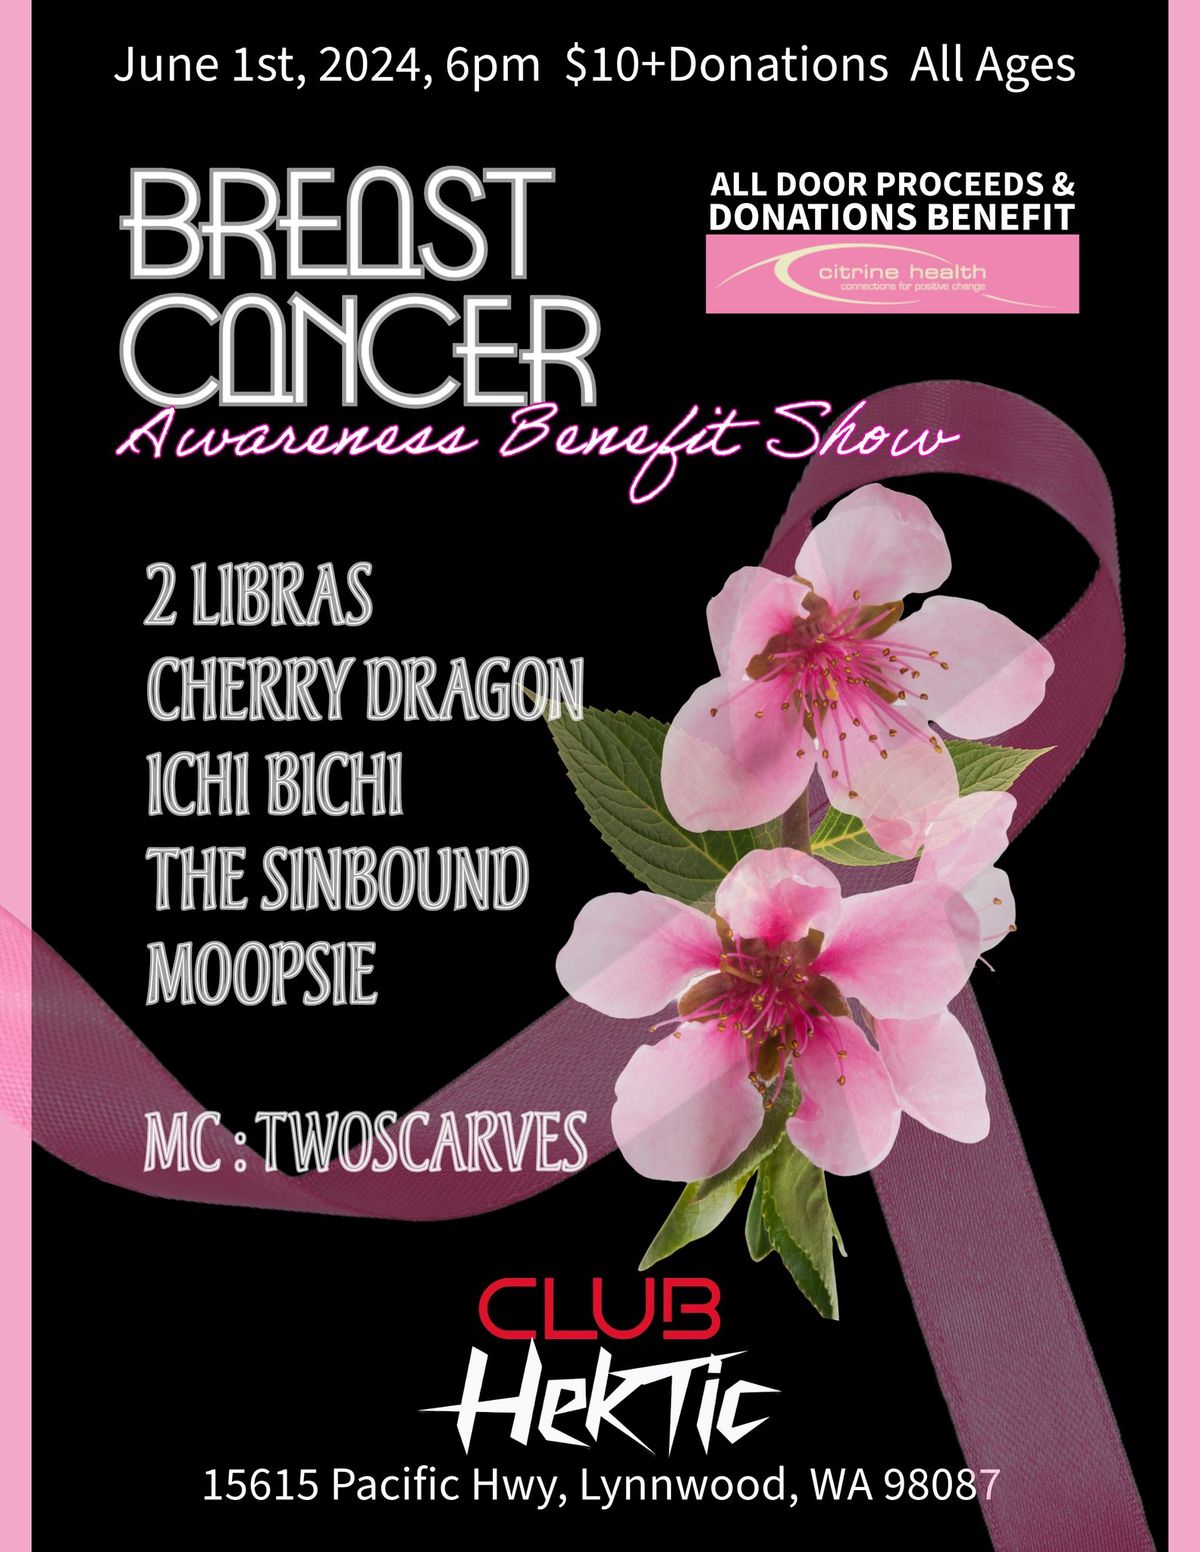 Breast Cancer Awareness Benefit Show